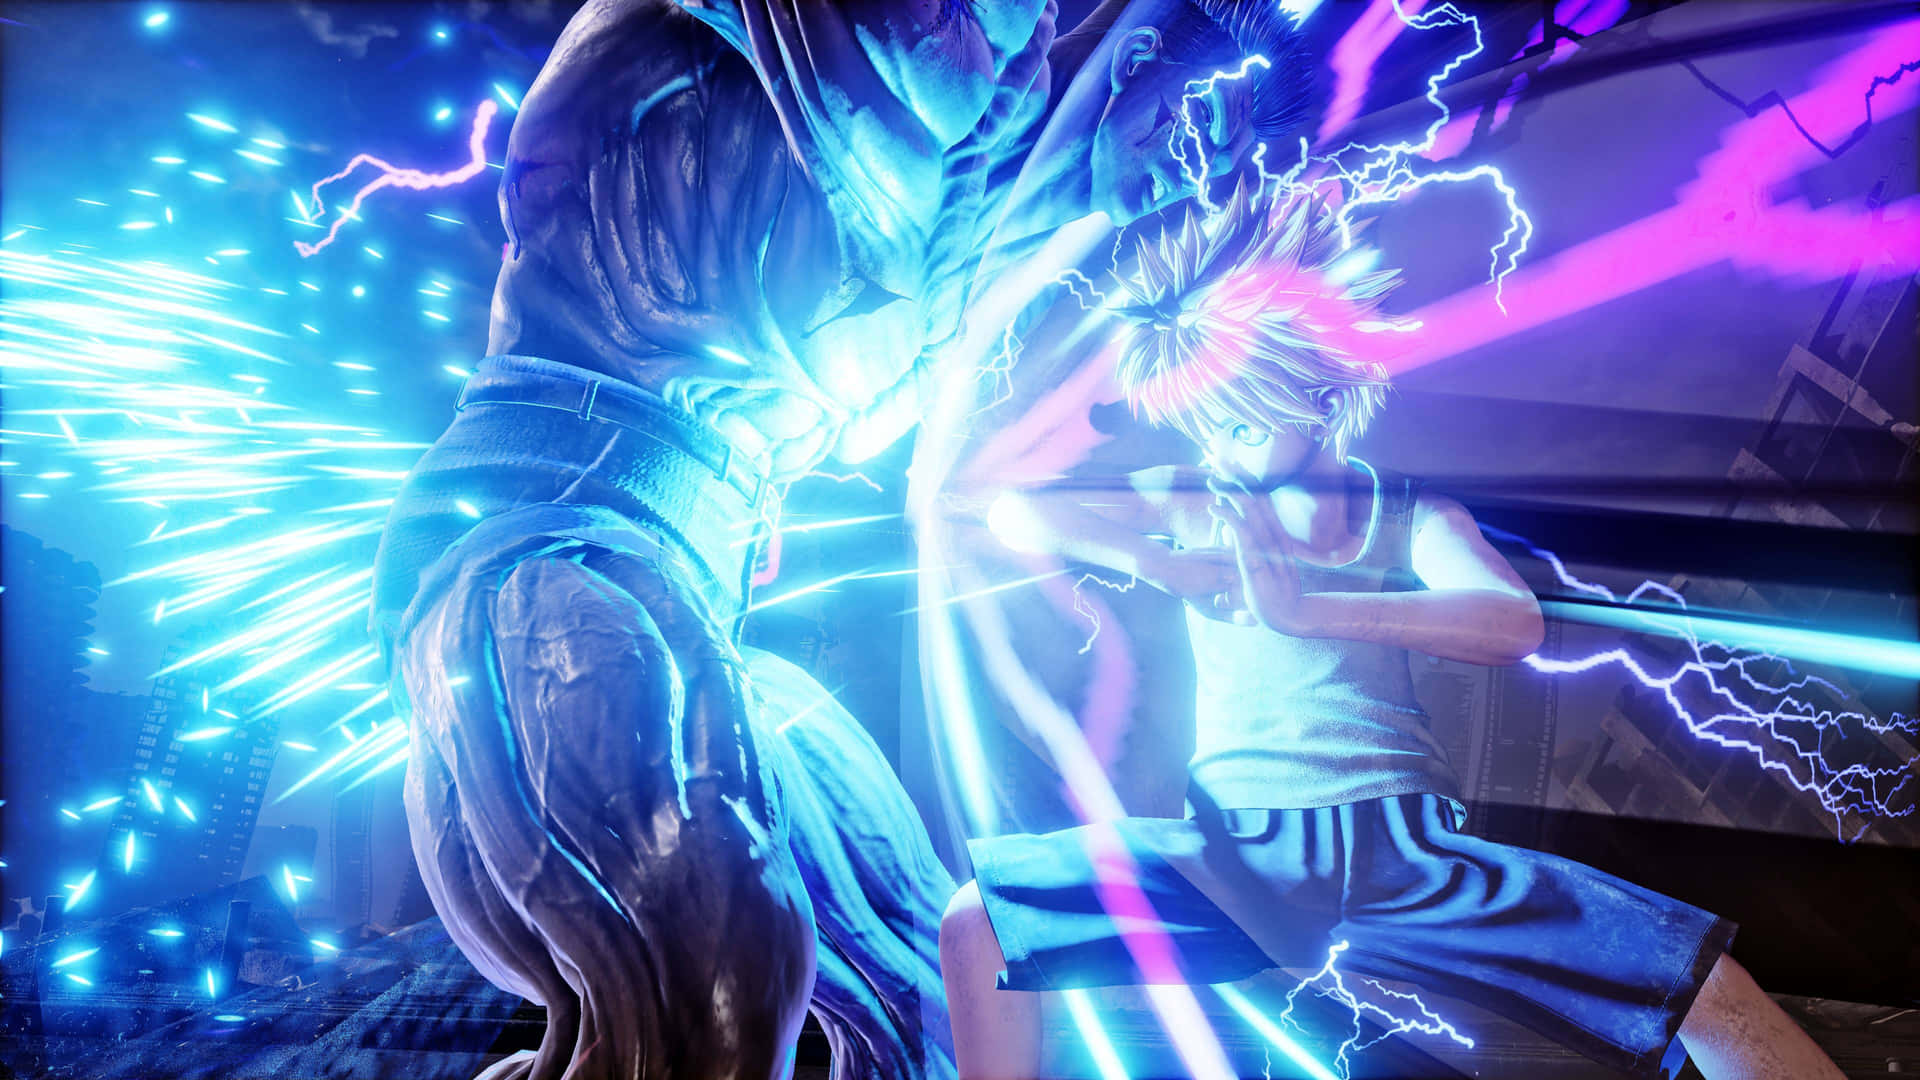 A Man Is Fighting With A Sword In Front Of A Blue Light Wallpaper